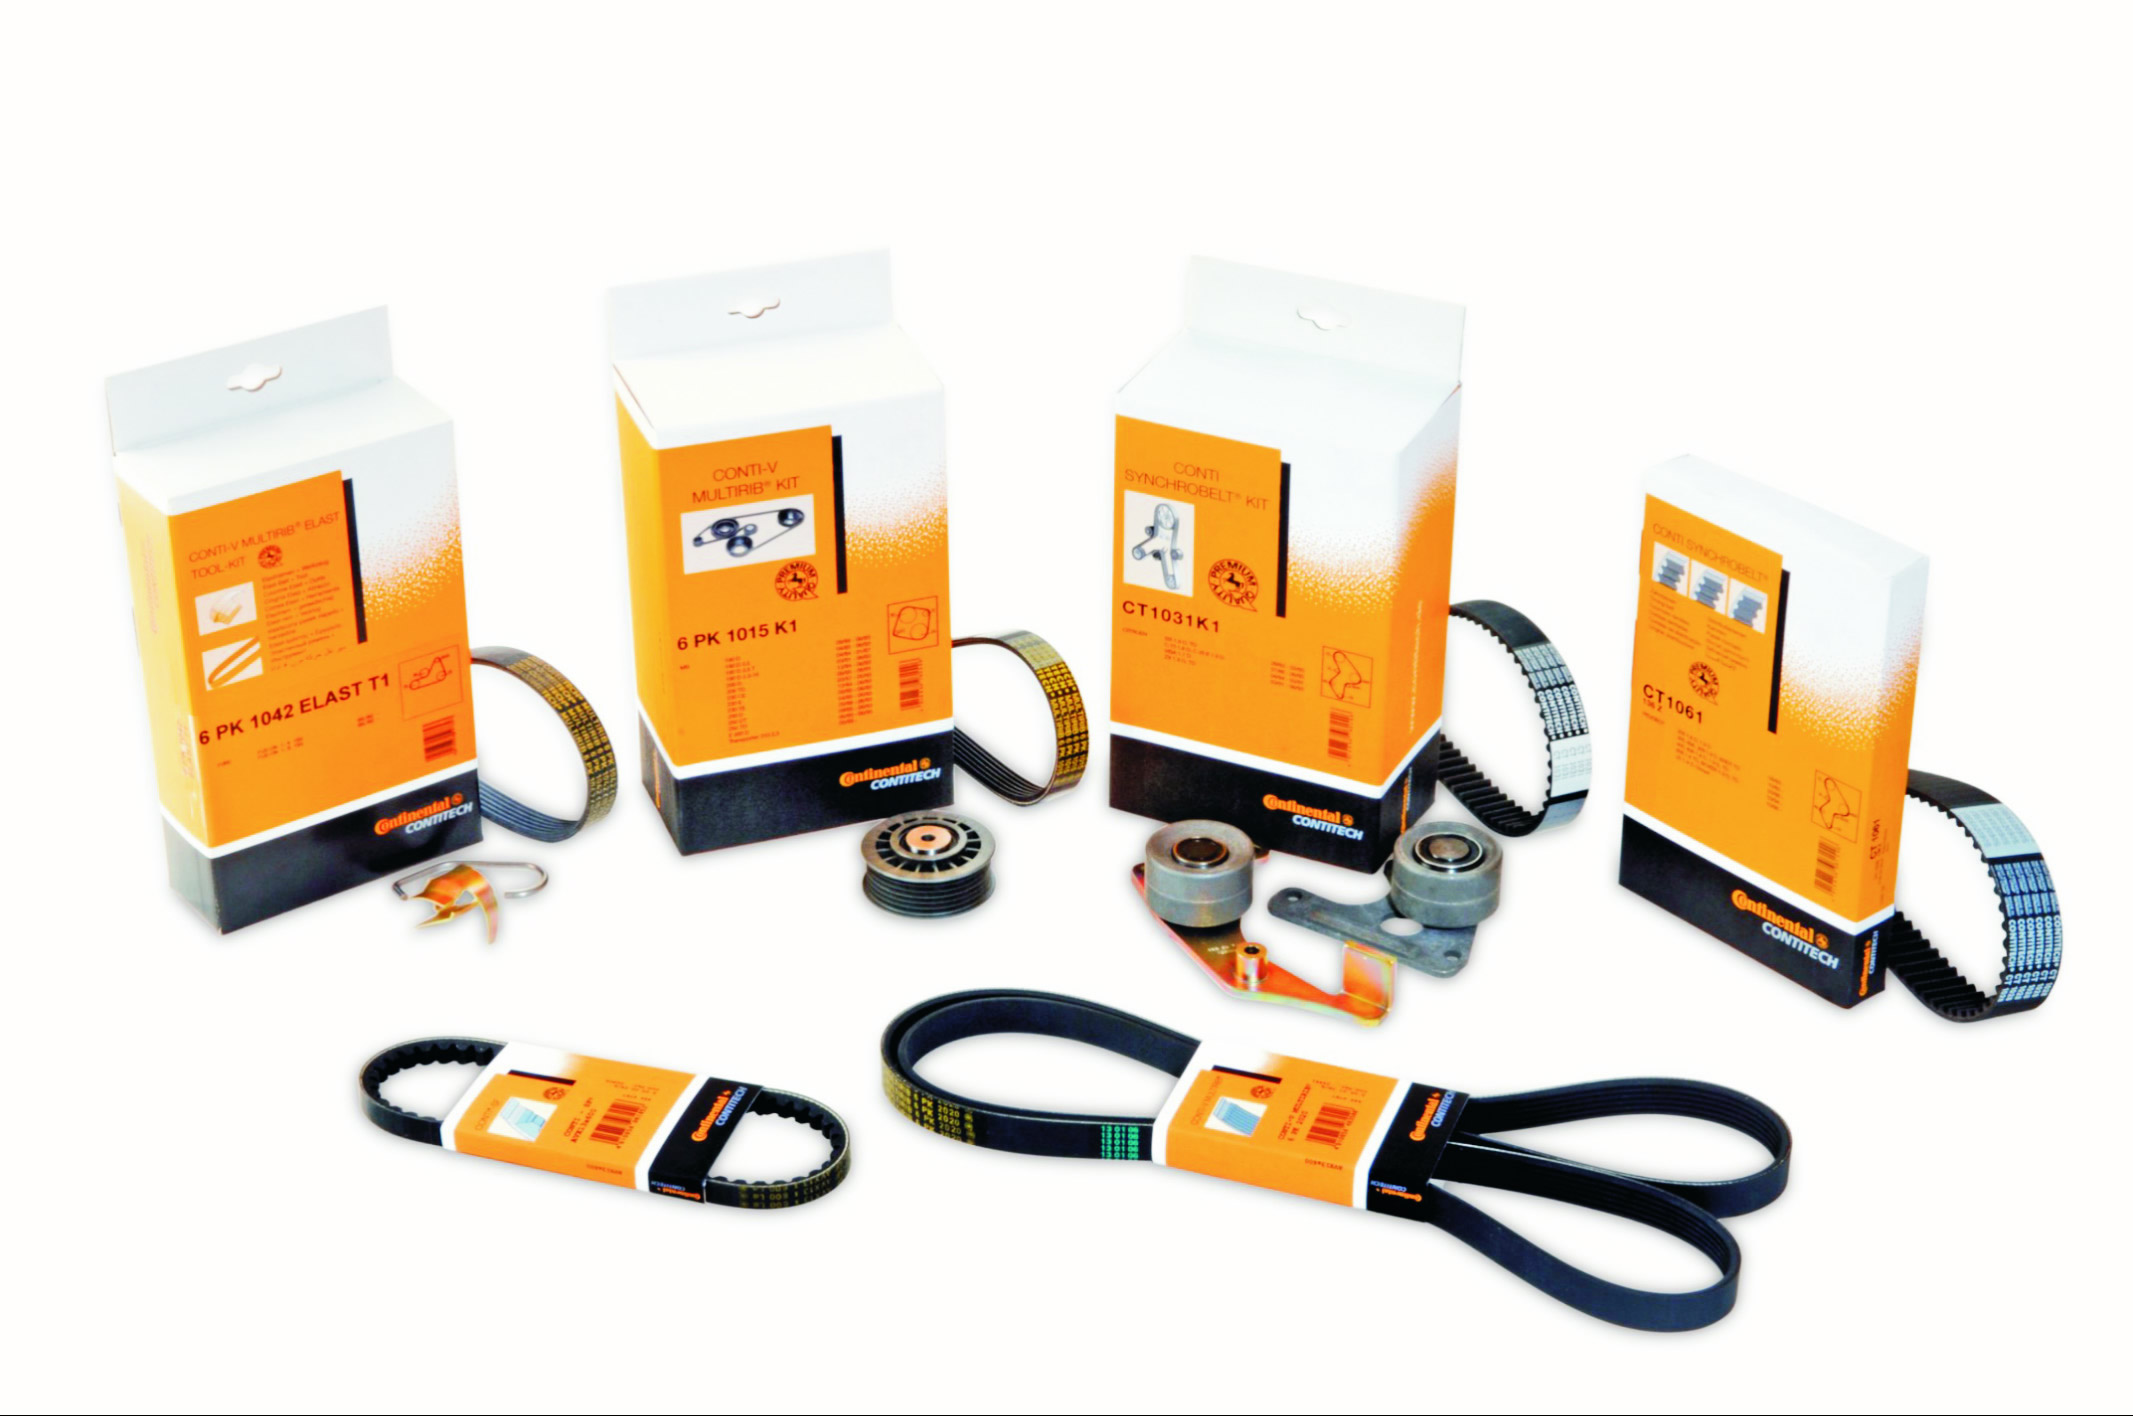 Continental Targets Automotive Technicians with “We Get It” Theme